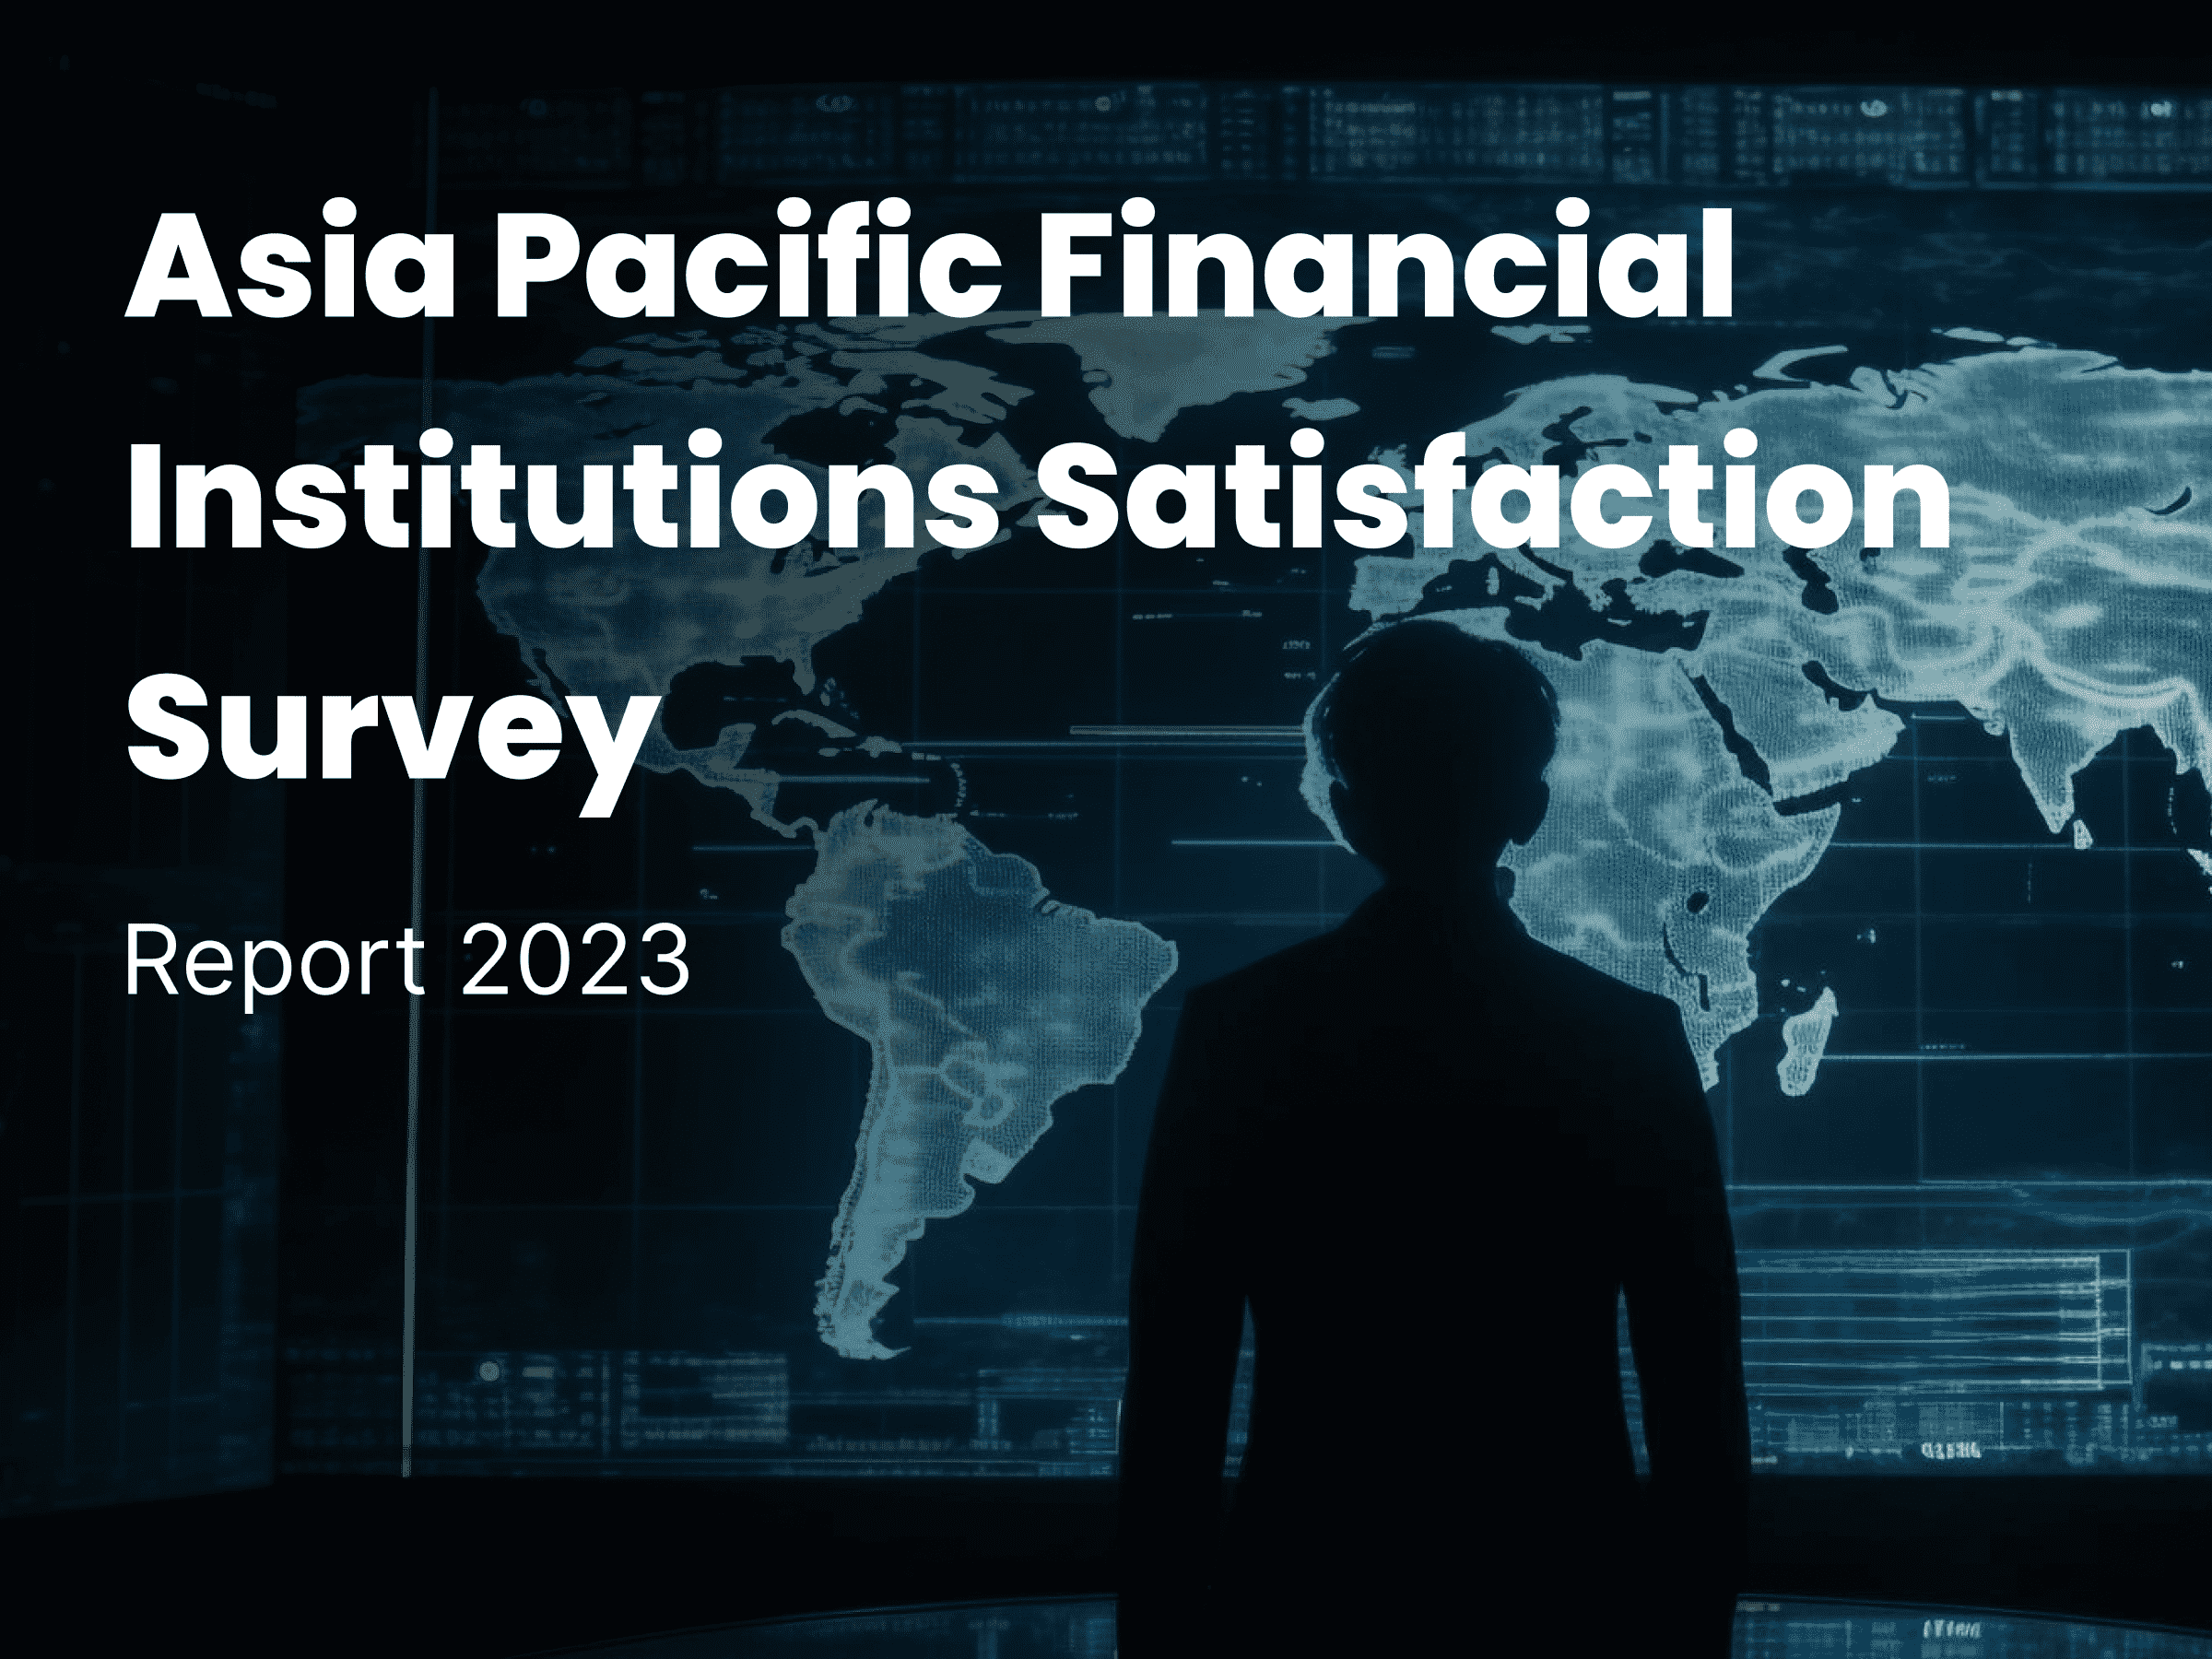 Asia Pacific Financial Institutions Satisfaction Survey 2023